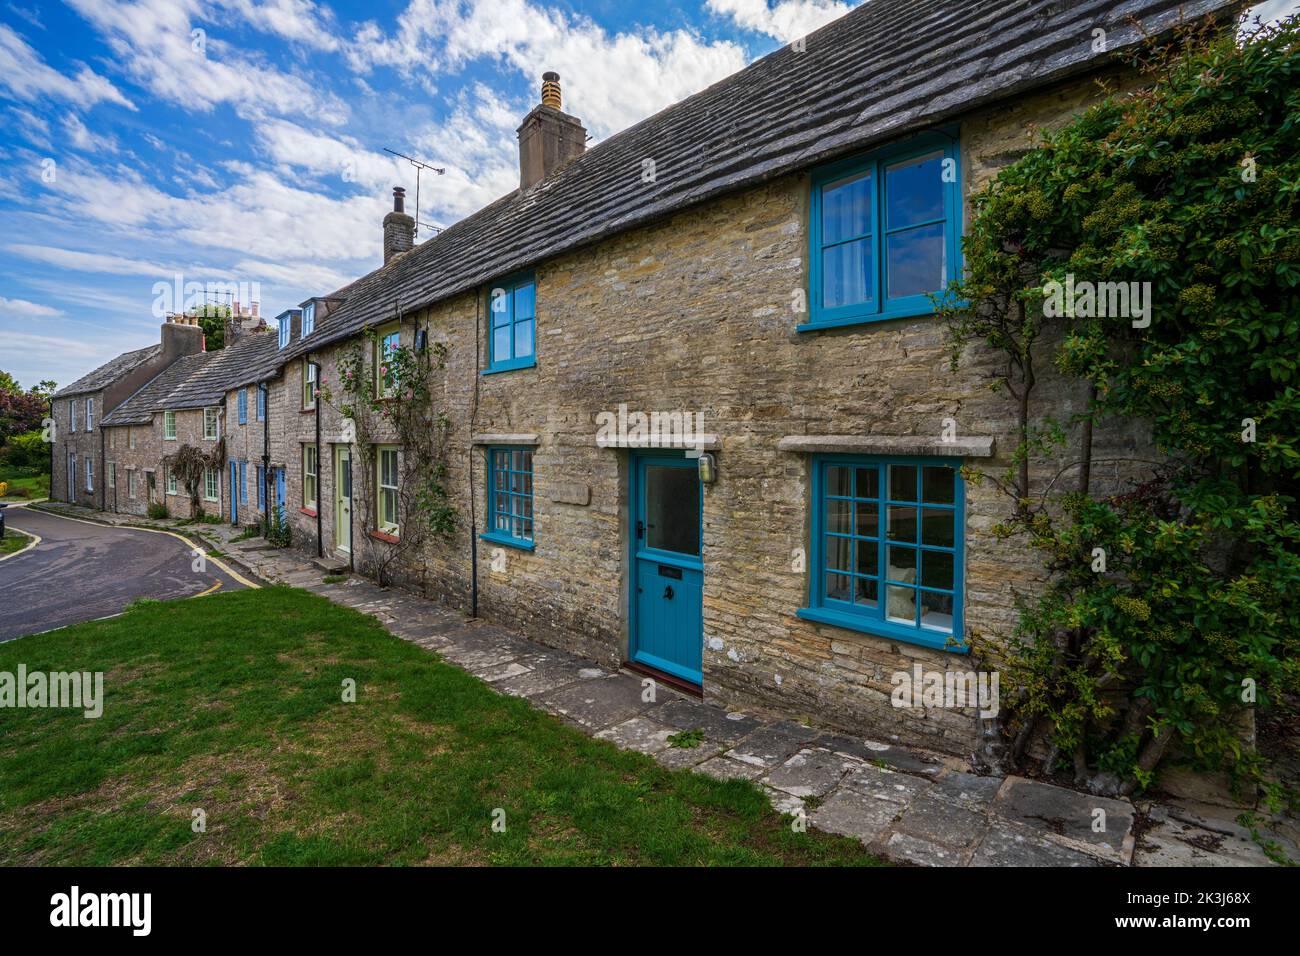 A row of cottages built of out the local Purbeck stone in Worth Matravers Dorset England UK Stock Photo